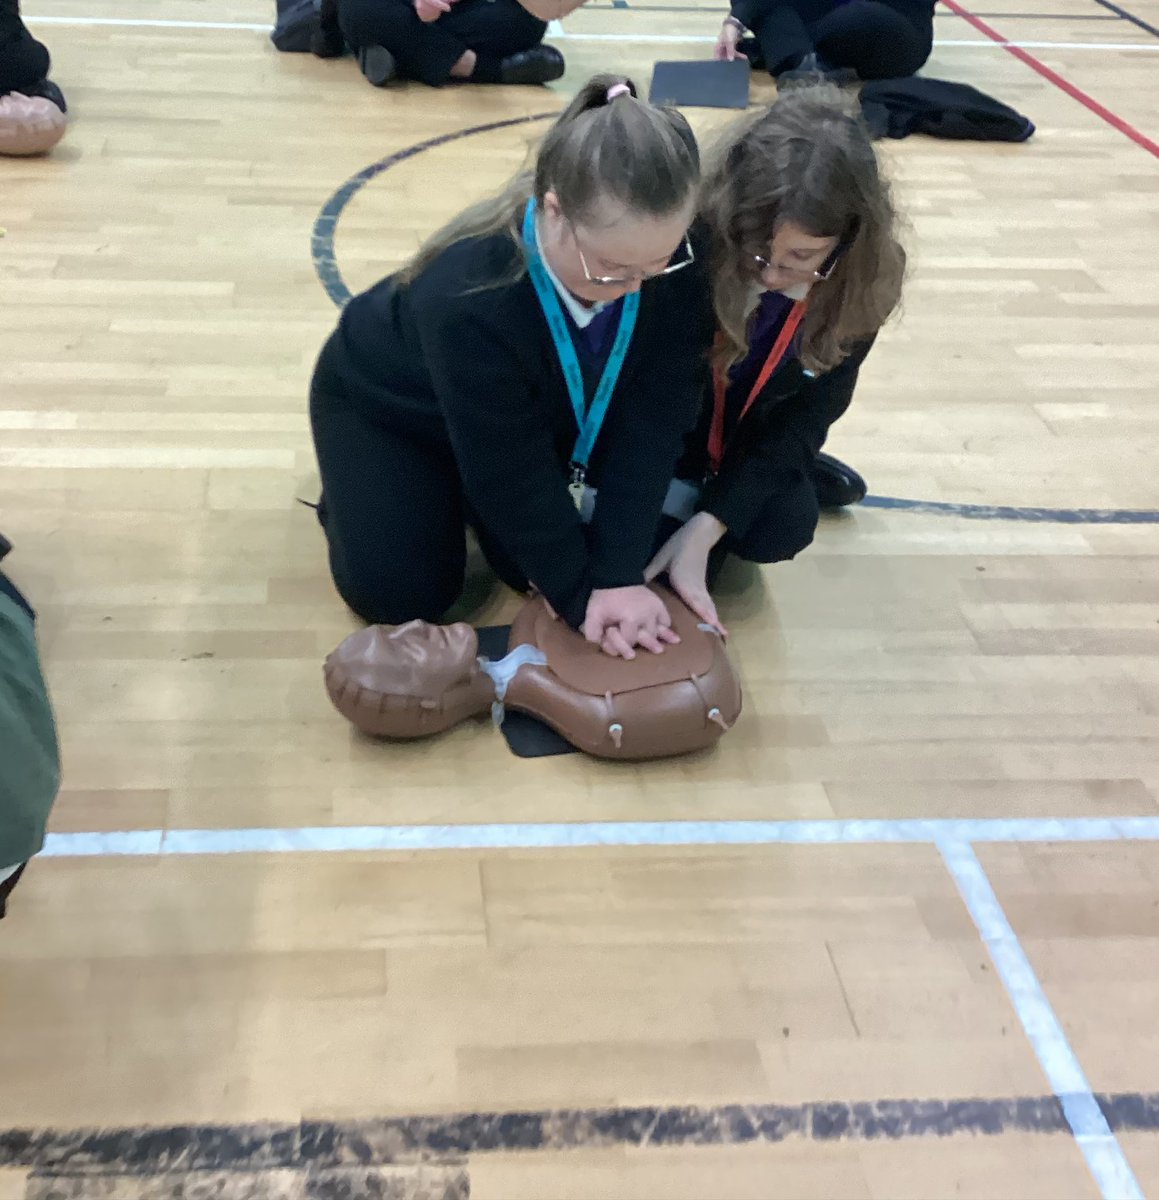 Last week, House Leaders visited Year 7 and Year 8 guardian groups delivering CPR sessions with our Resusci Annies for ‘Restart a Heart’ day. The students received some training and then got to have a go at performing chest compressions to ‘staying alive.'